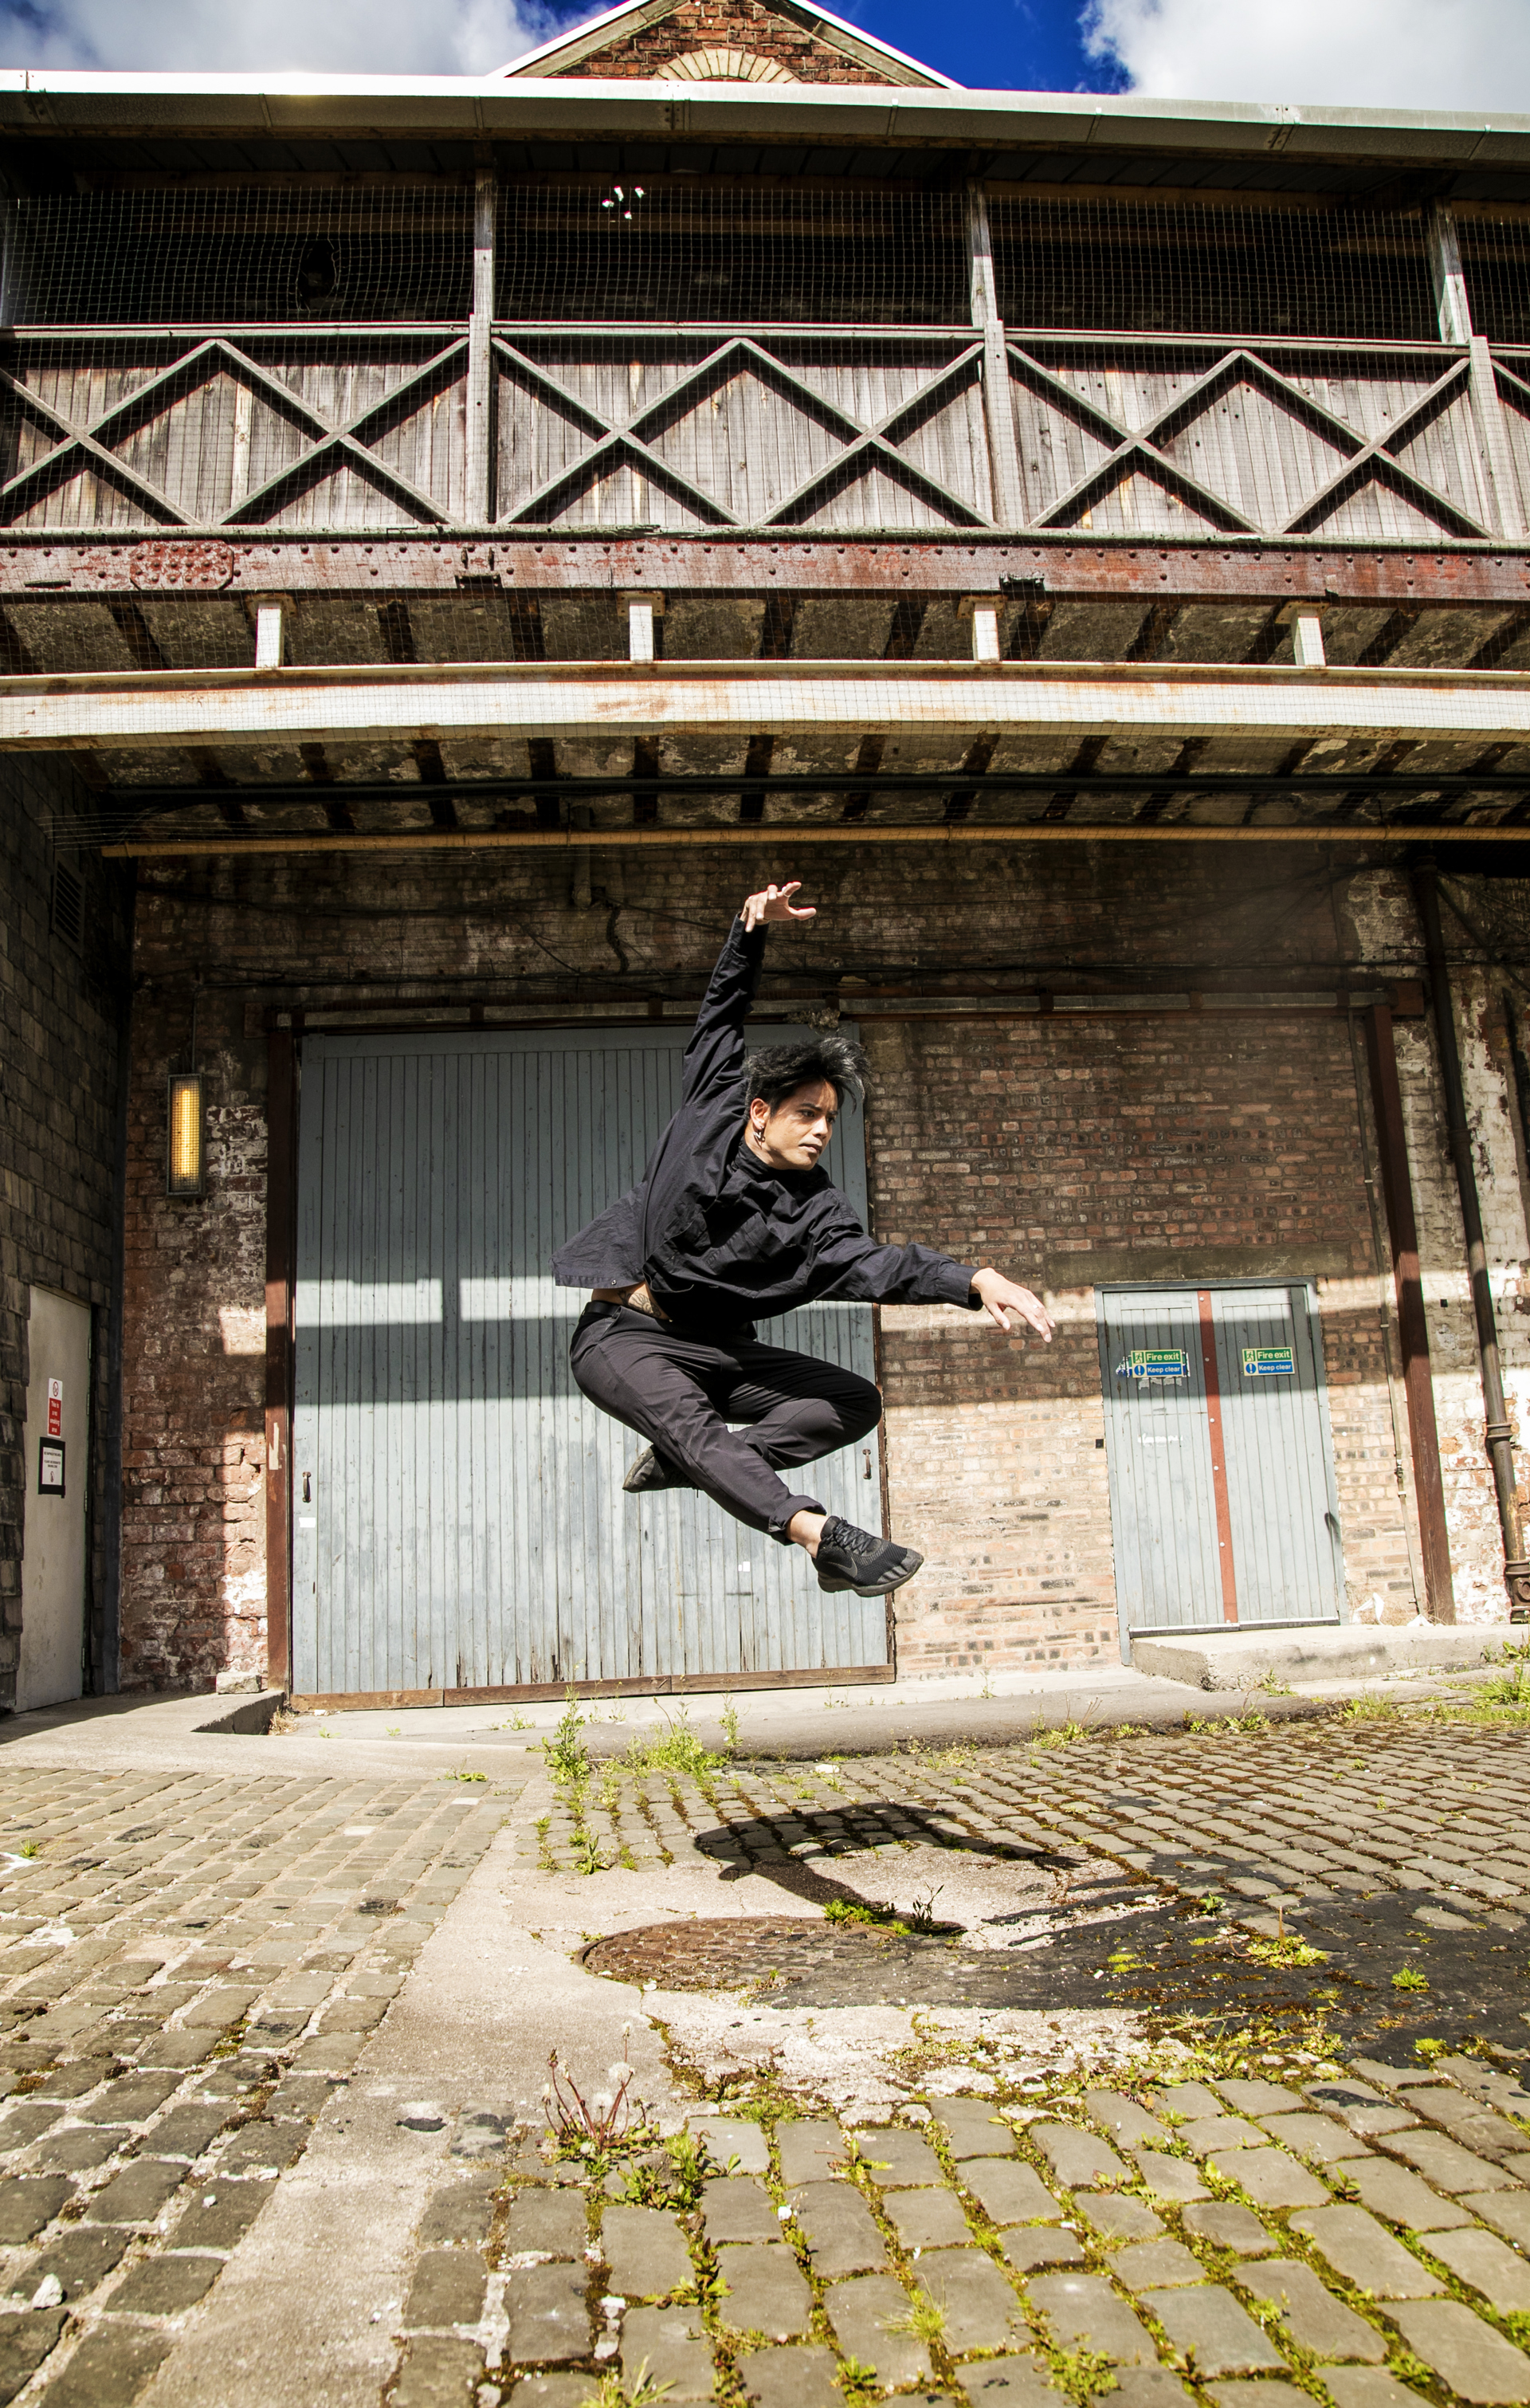 Global majority male dancer jumping high with one leg tucked behind him and the other strecthed in front of him, with one arm stretched above his head and the other out infront of his face angled to the bottom right of the image. Wearing all black in front of industrial building with wooden balcony and trinagle roof.